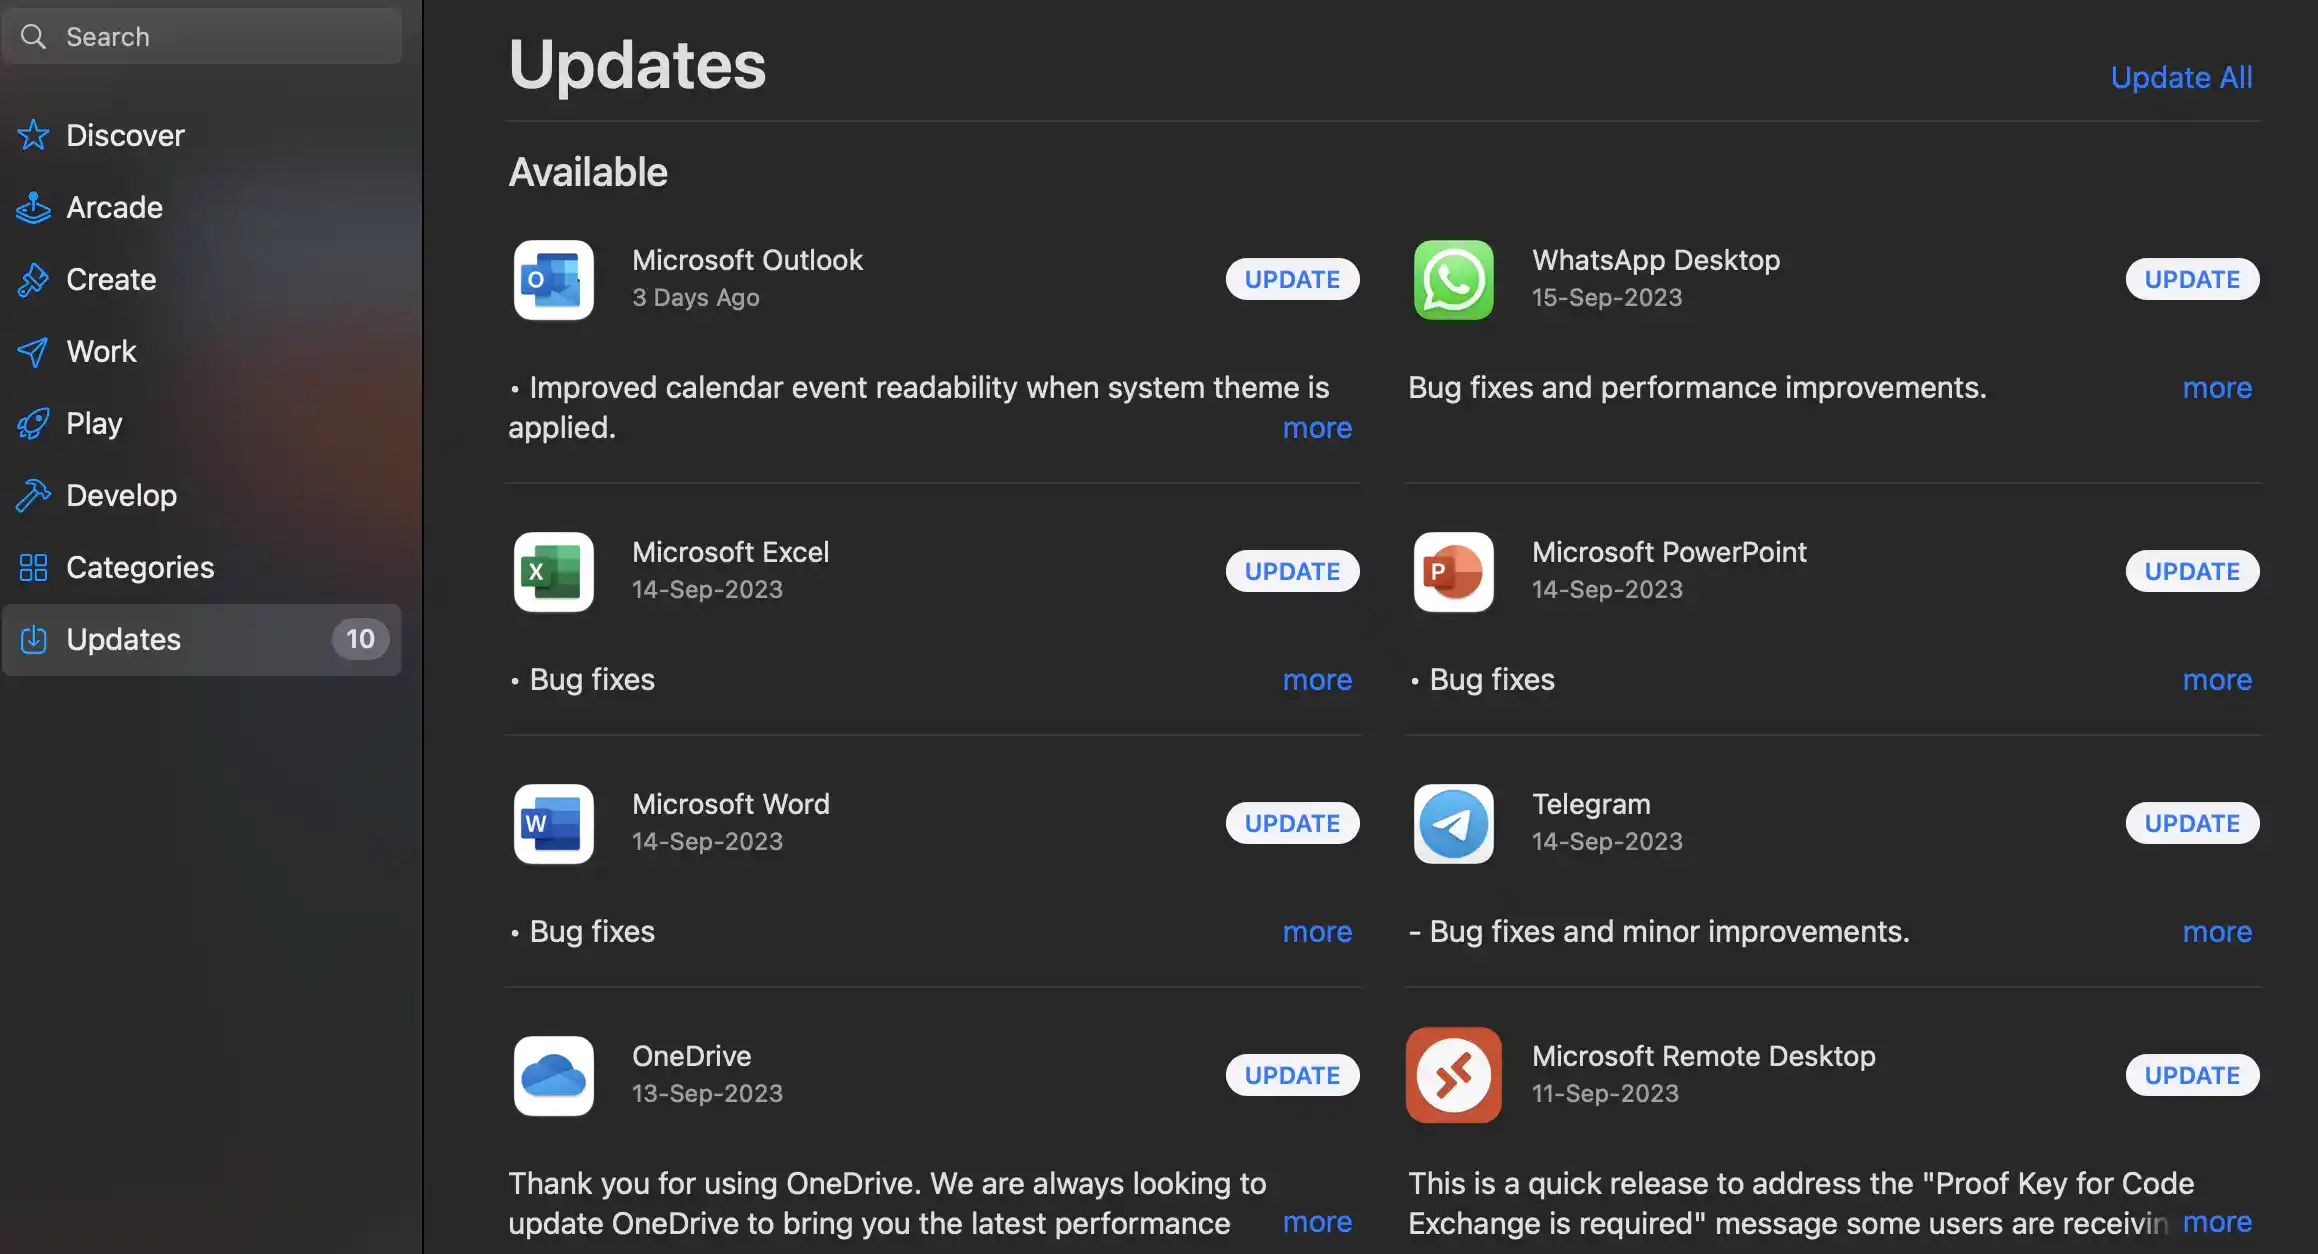 update is available for Xcode, it will appear in the list of updates